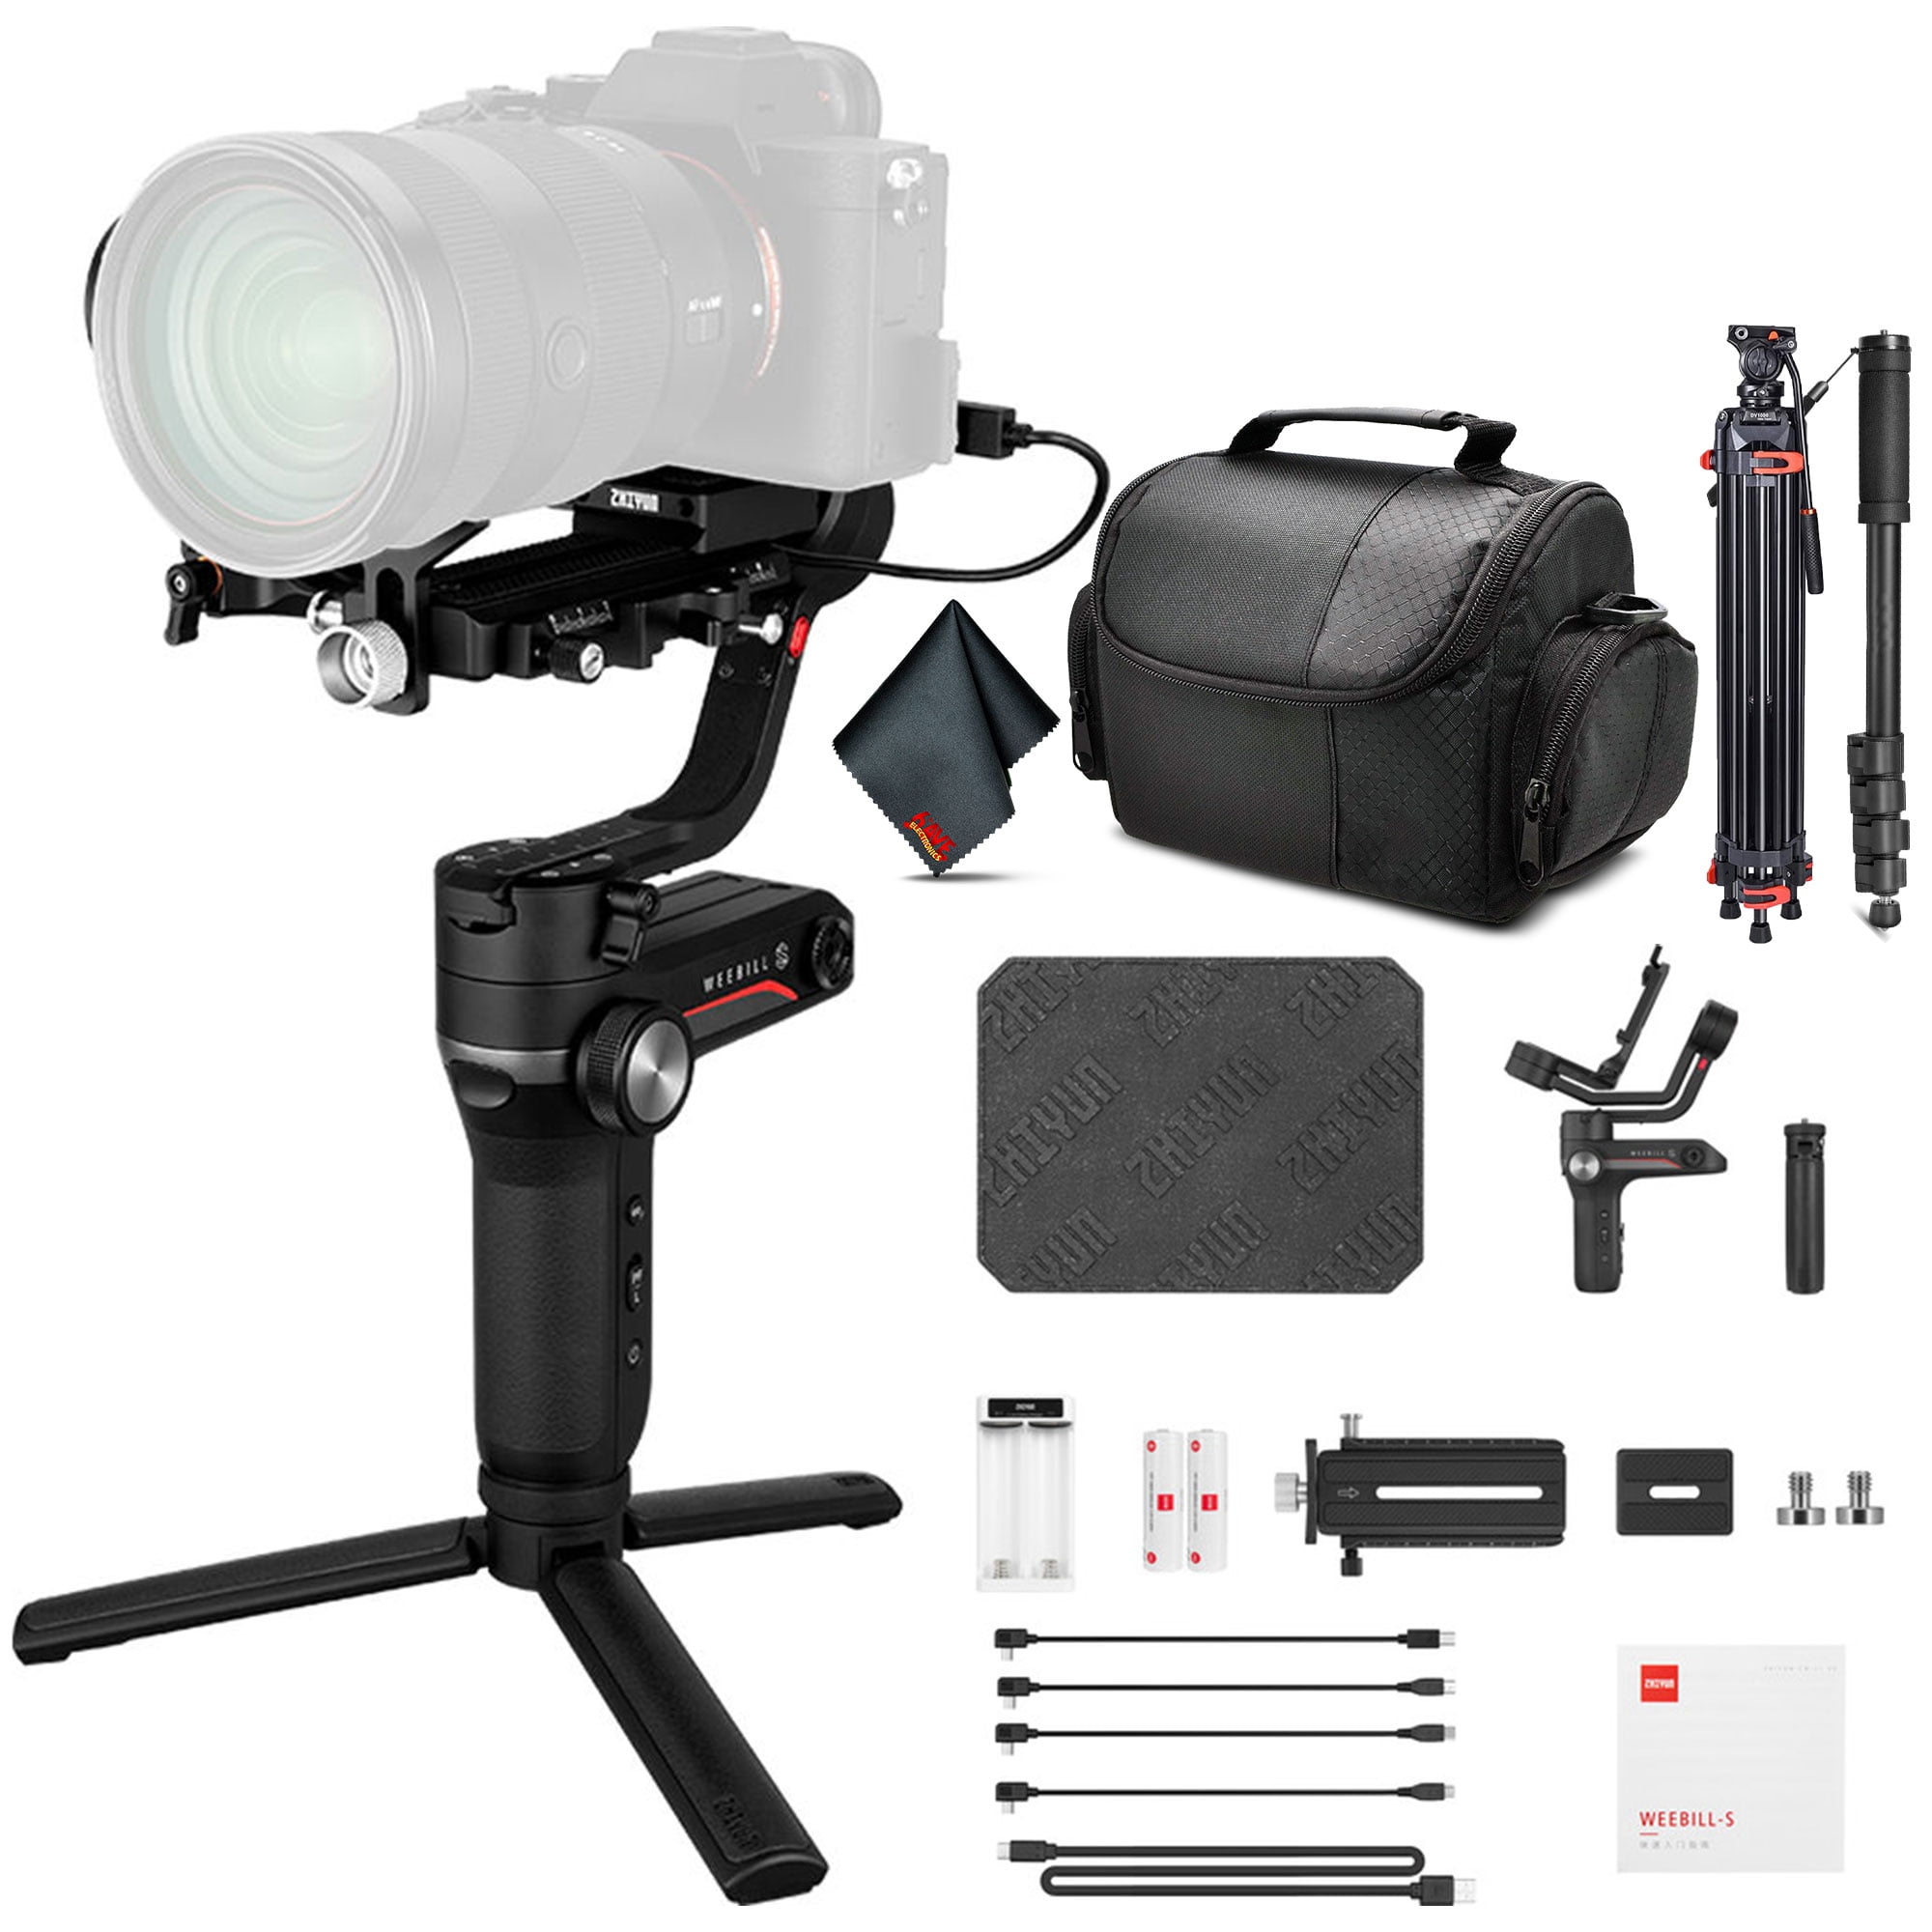 Zhiyun-Tech WEEBILL-S Handheld Gimbal Stabilizer Bundle with DSLR Camera  Bag, Portable LED Video Light, 72in Professional Heavy Duty Tripod, and  70in 